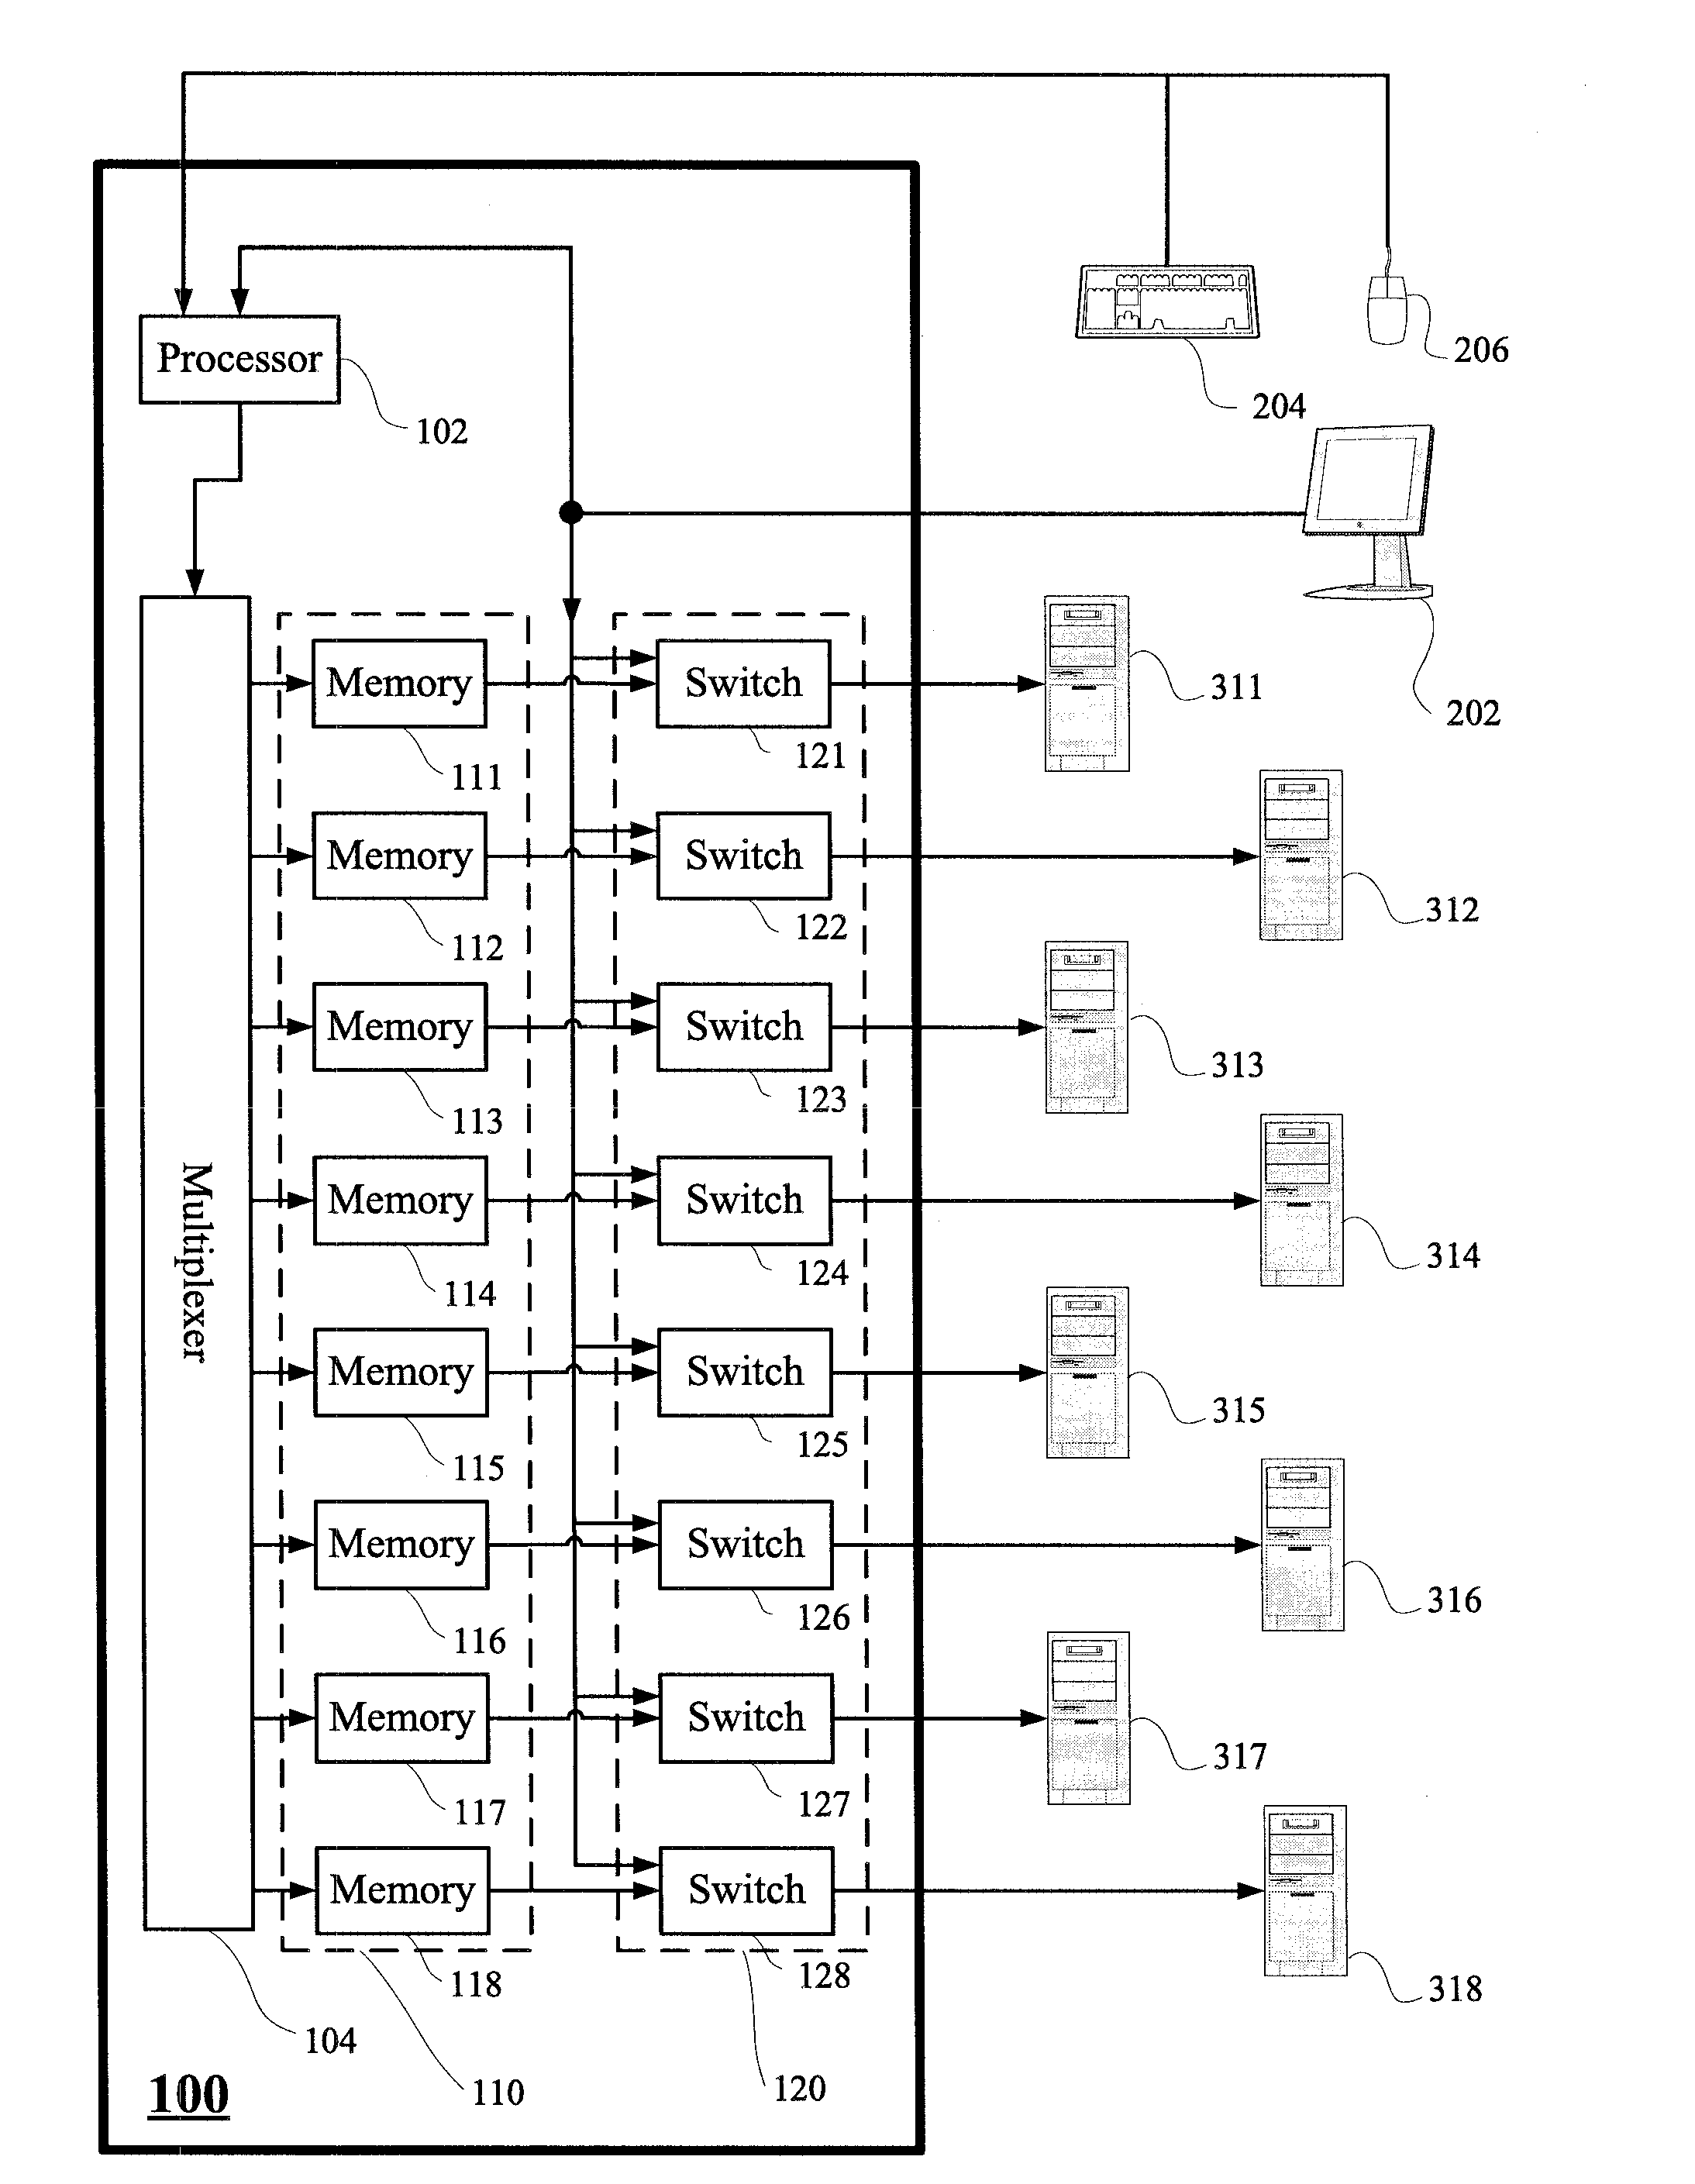 KVM switch capable of providing edid of display for computer coupled thereto and method thereof